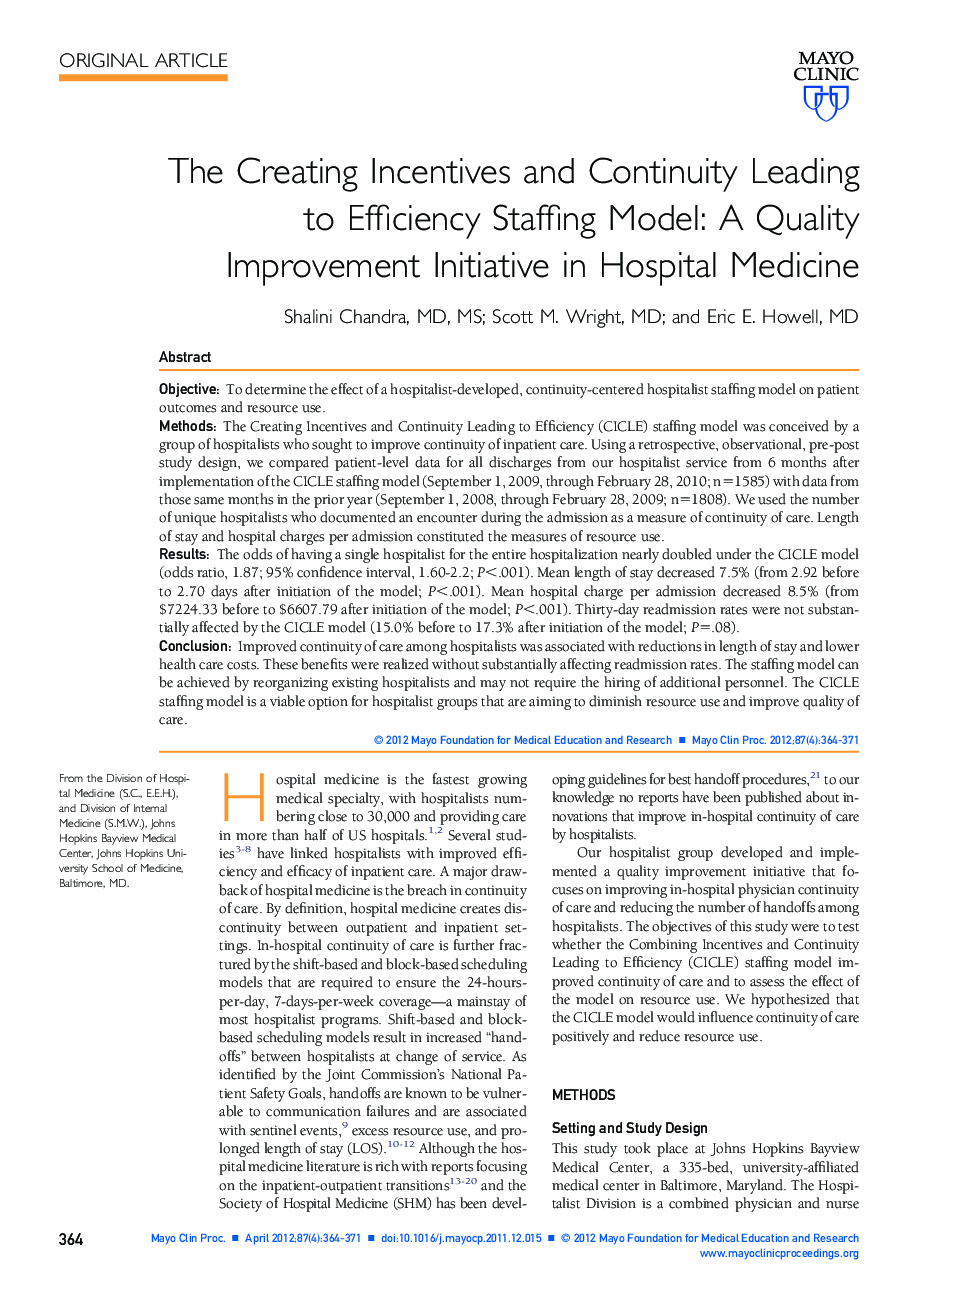 The Creating Incentives and Continuity Leading to Efficiency Staffing Model: A Quality Improvement Initiative in Hospital Medicine